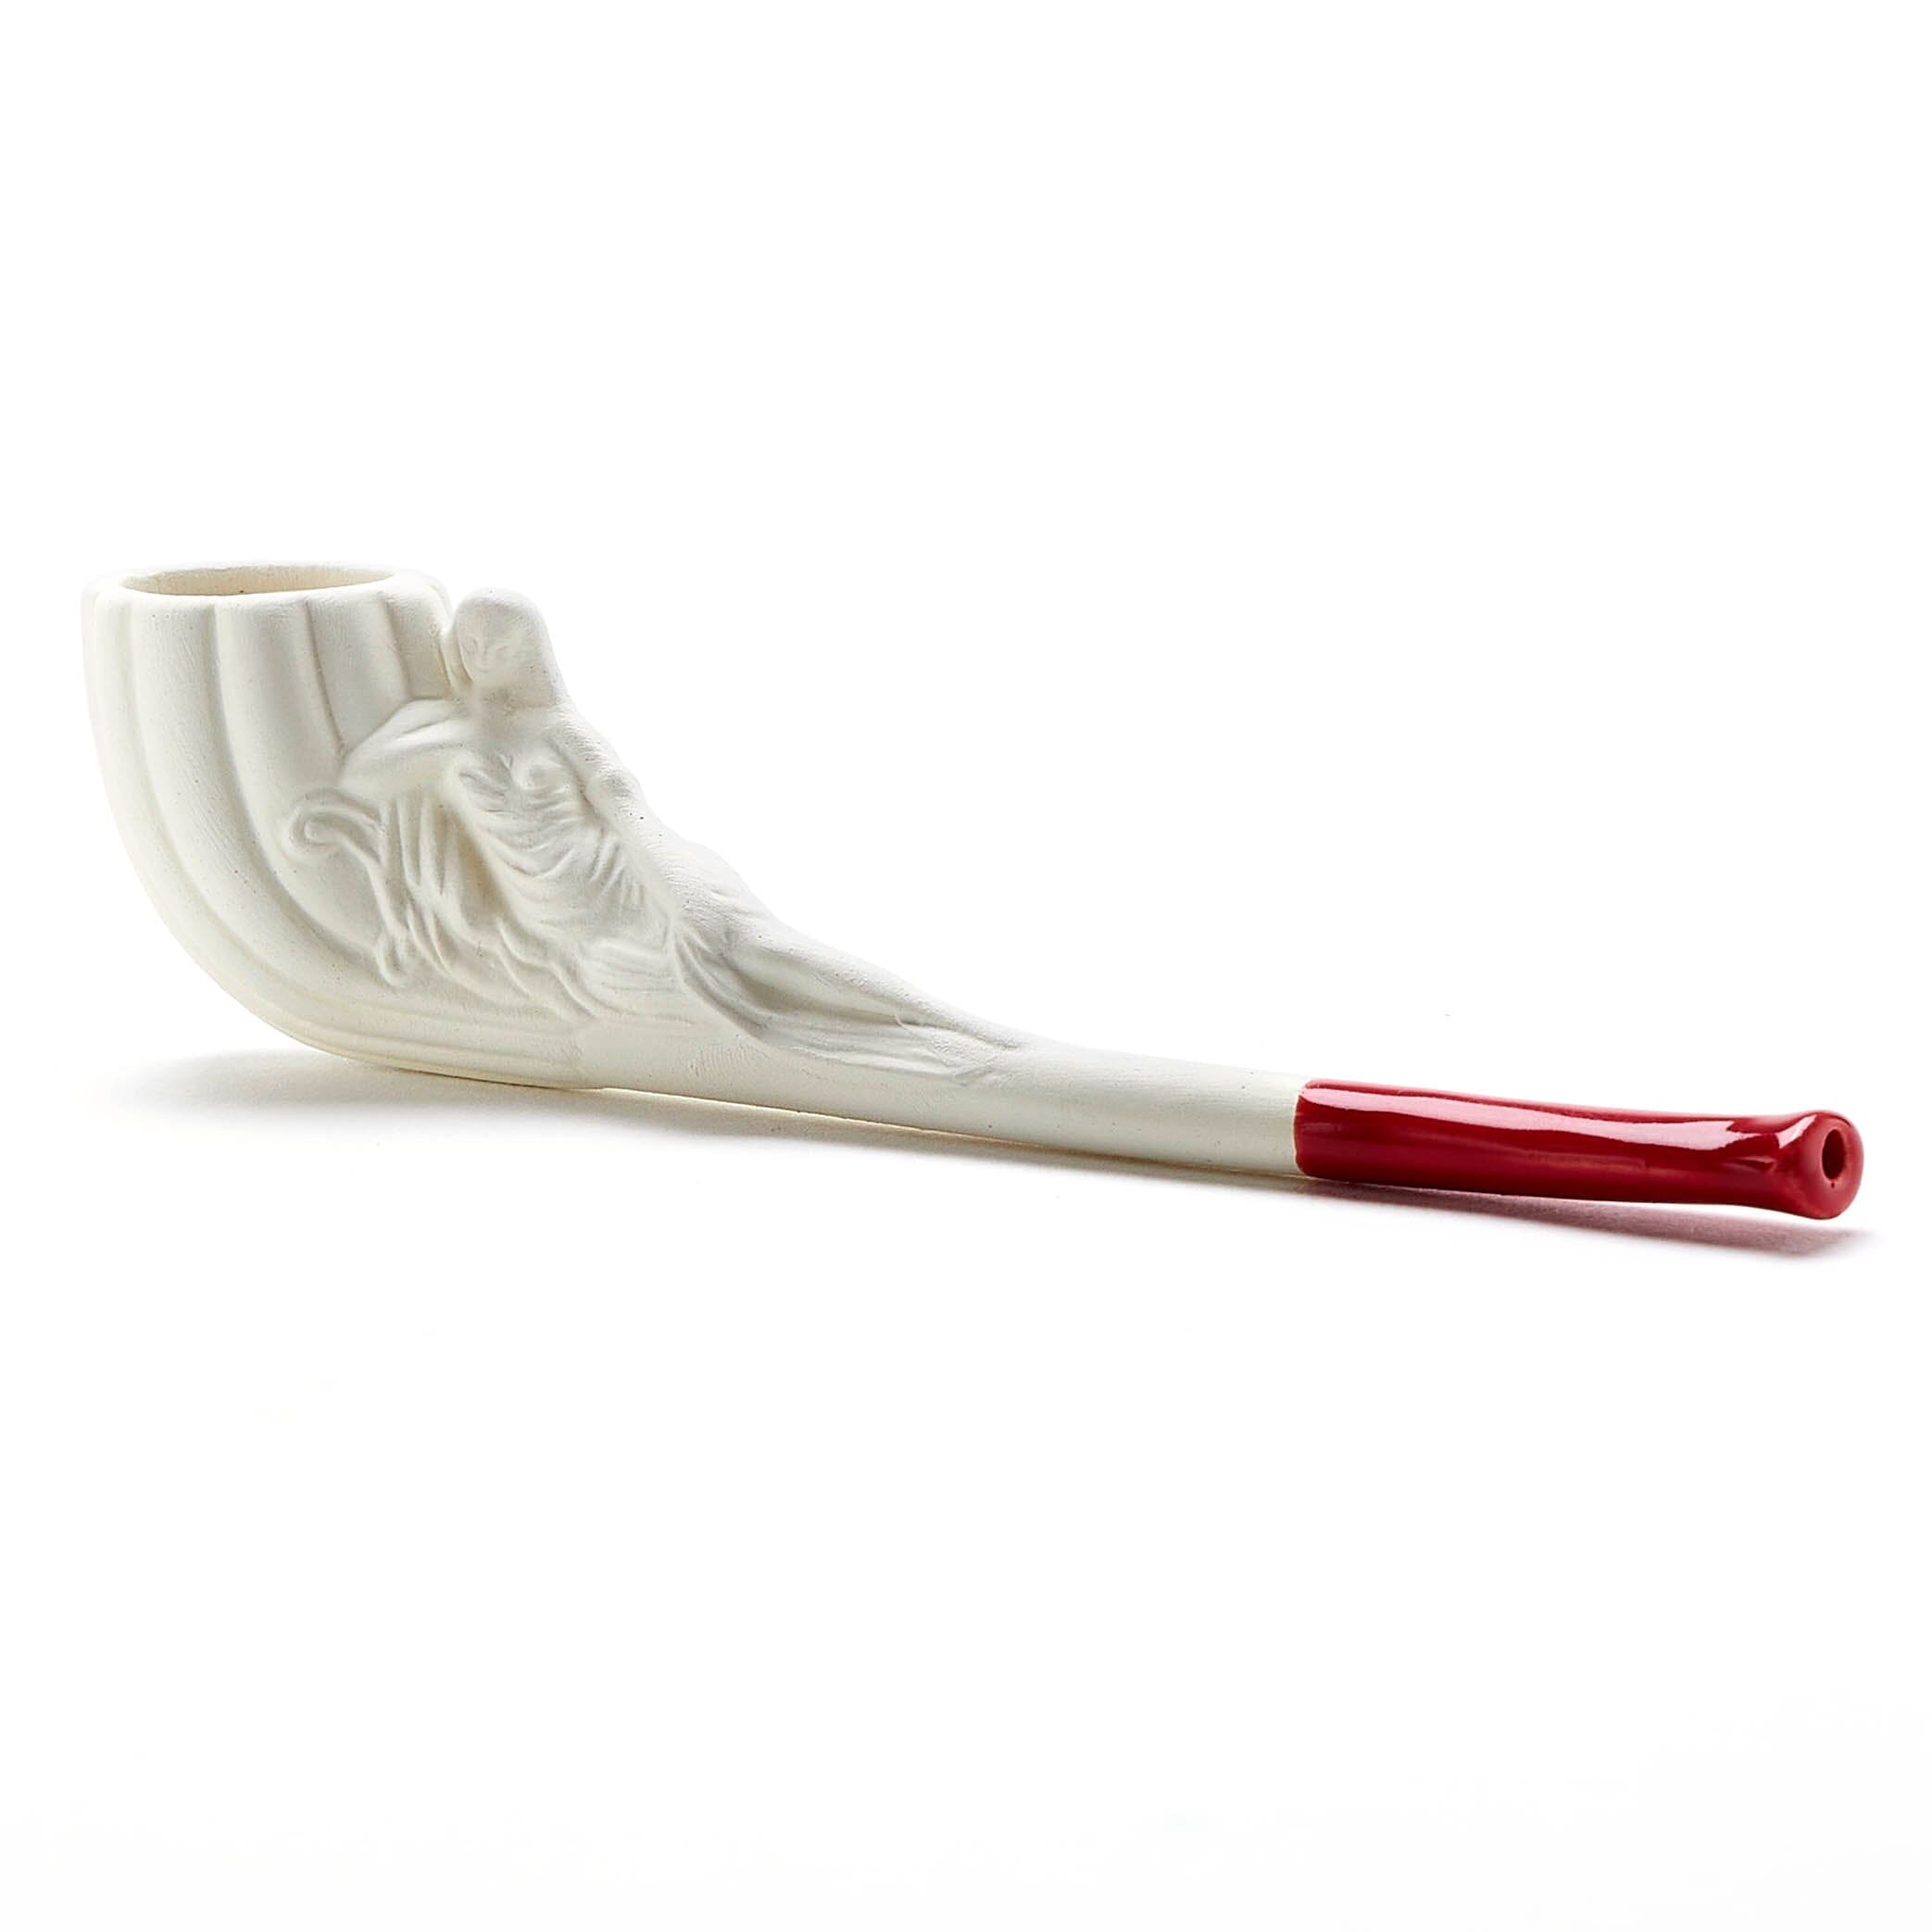 clay tobacco pipe